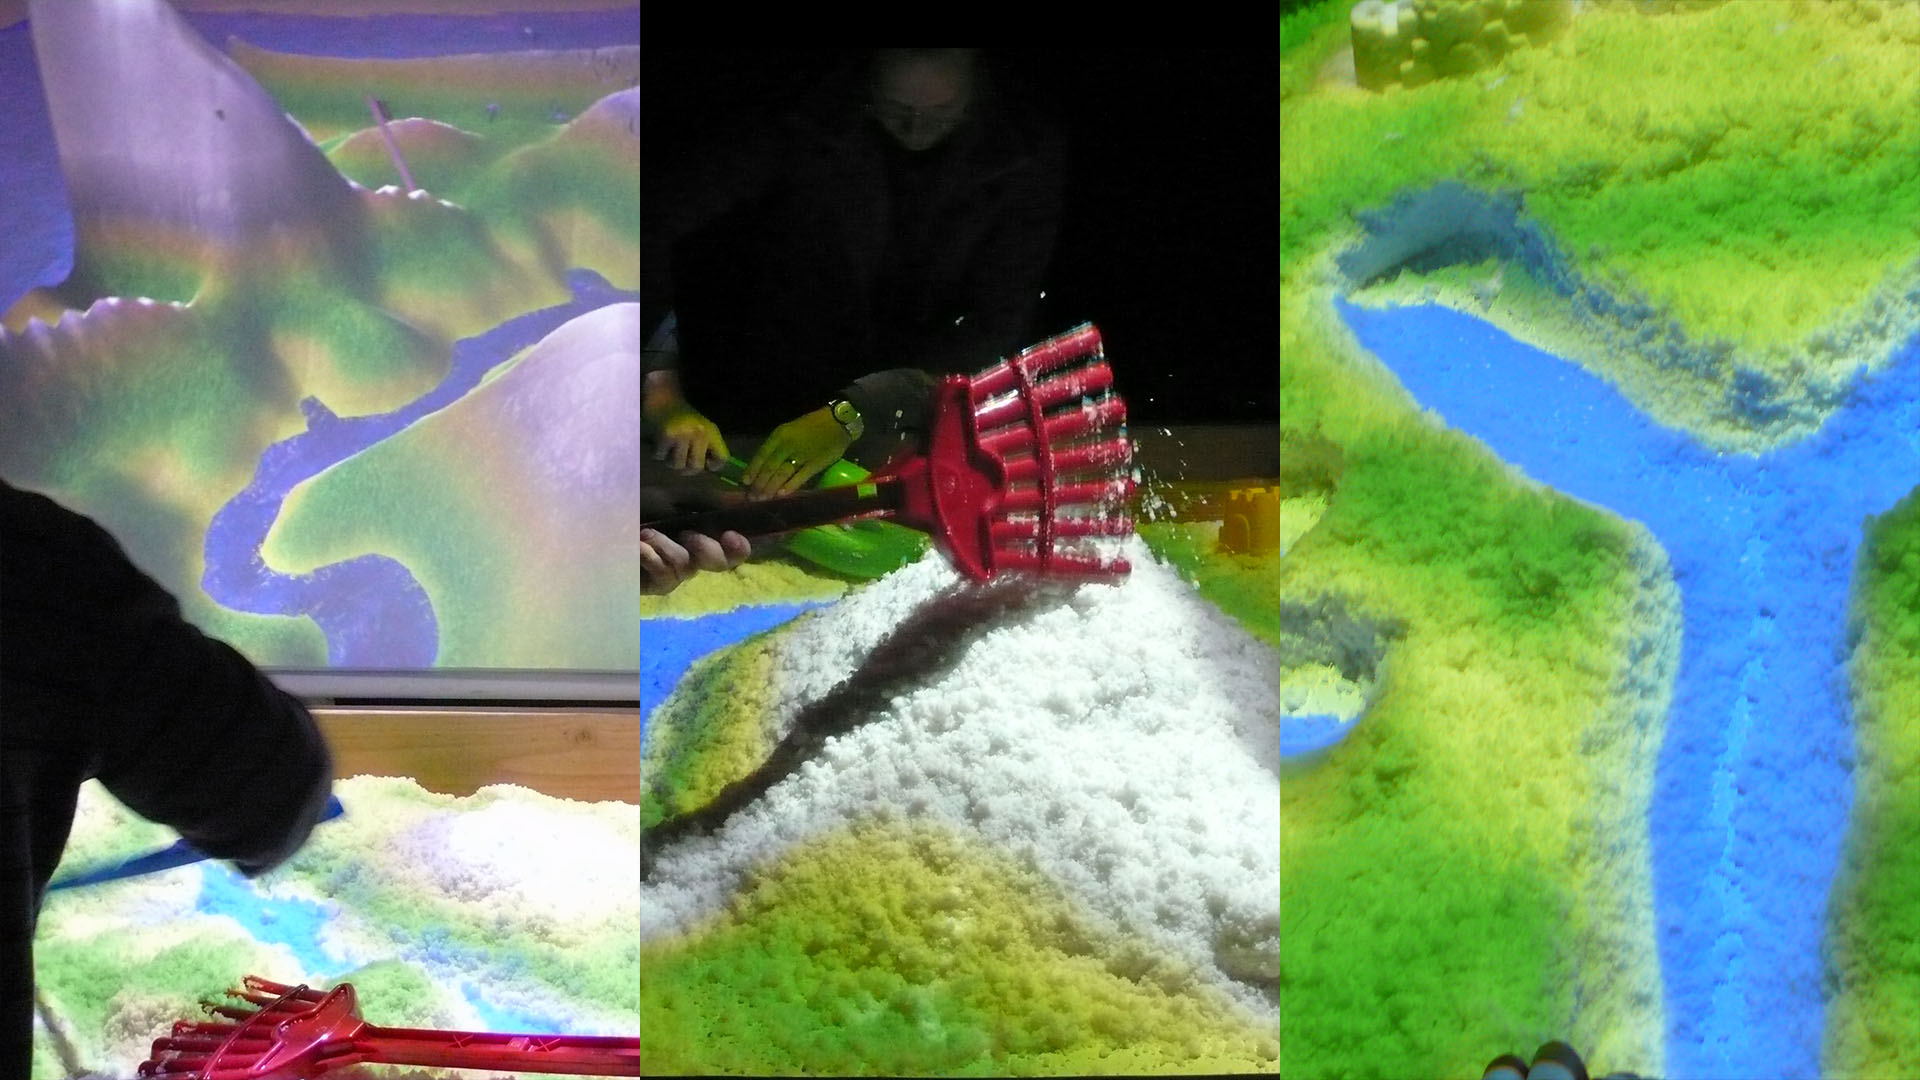 Real-time Dynamic Feedback - The landscape adjusts as participants shape valleys, dig rivers, and pile up mountains.